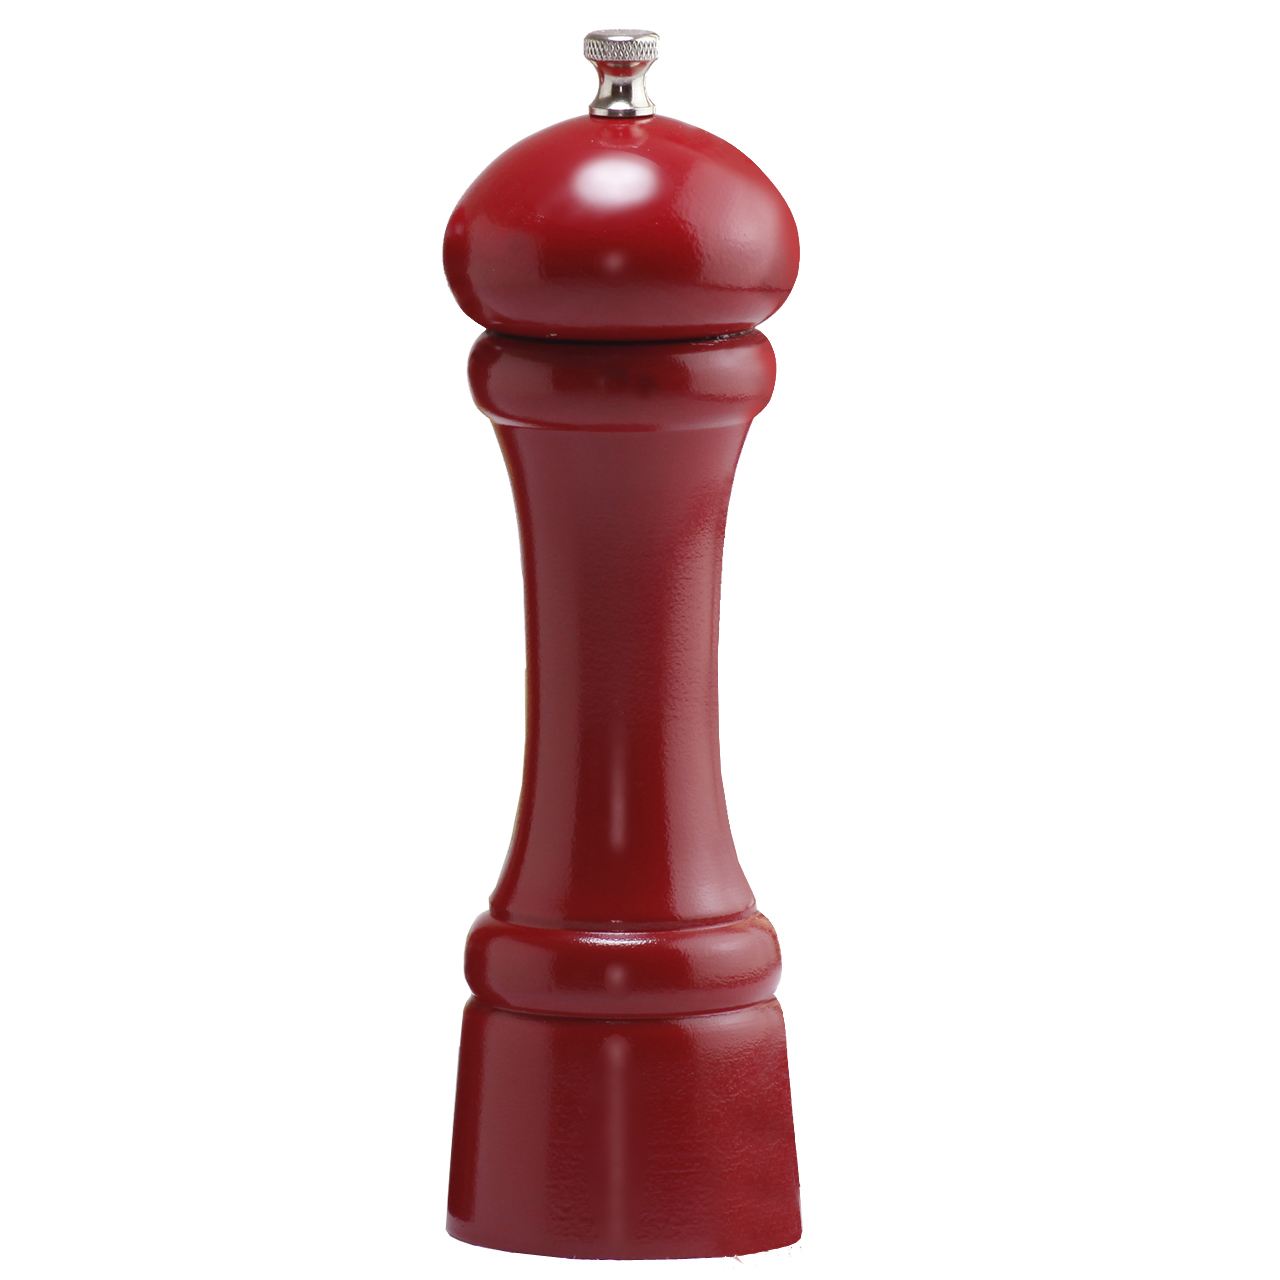 08651 8 In. Candy Apple Red Pepper Mill